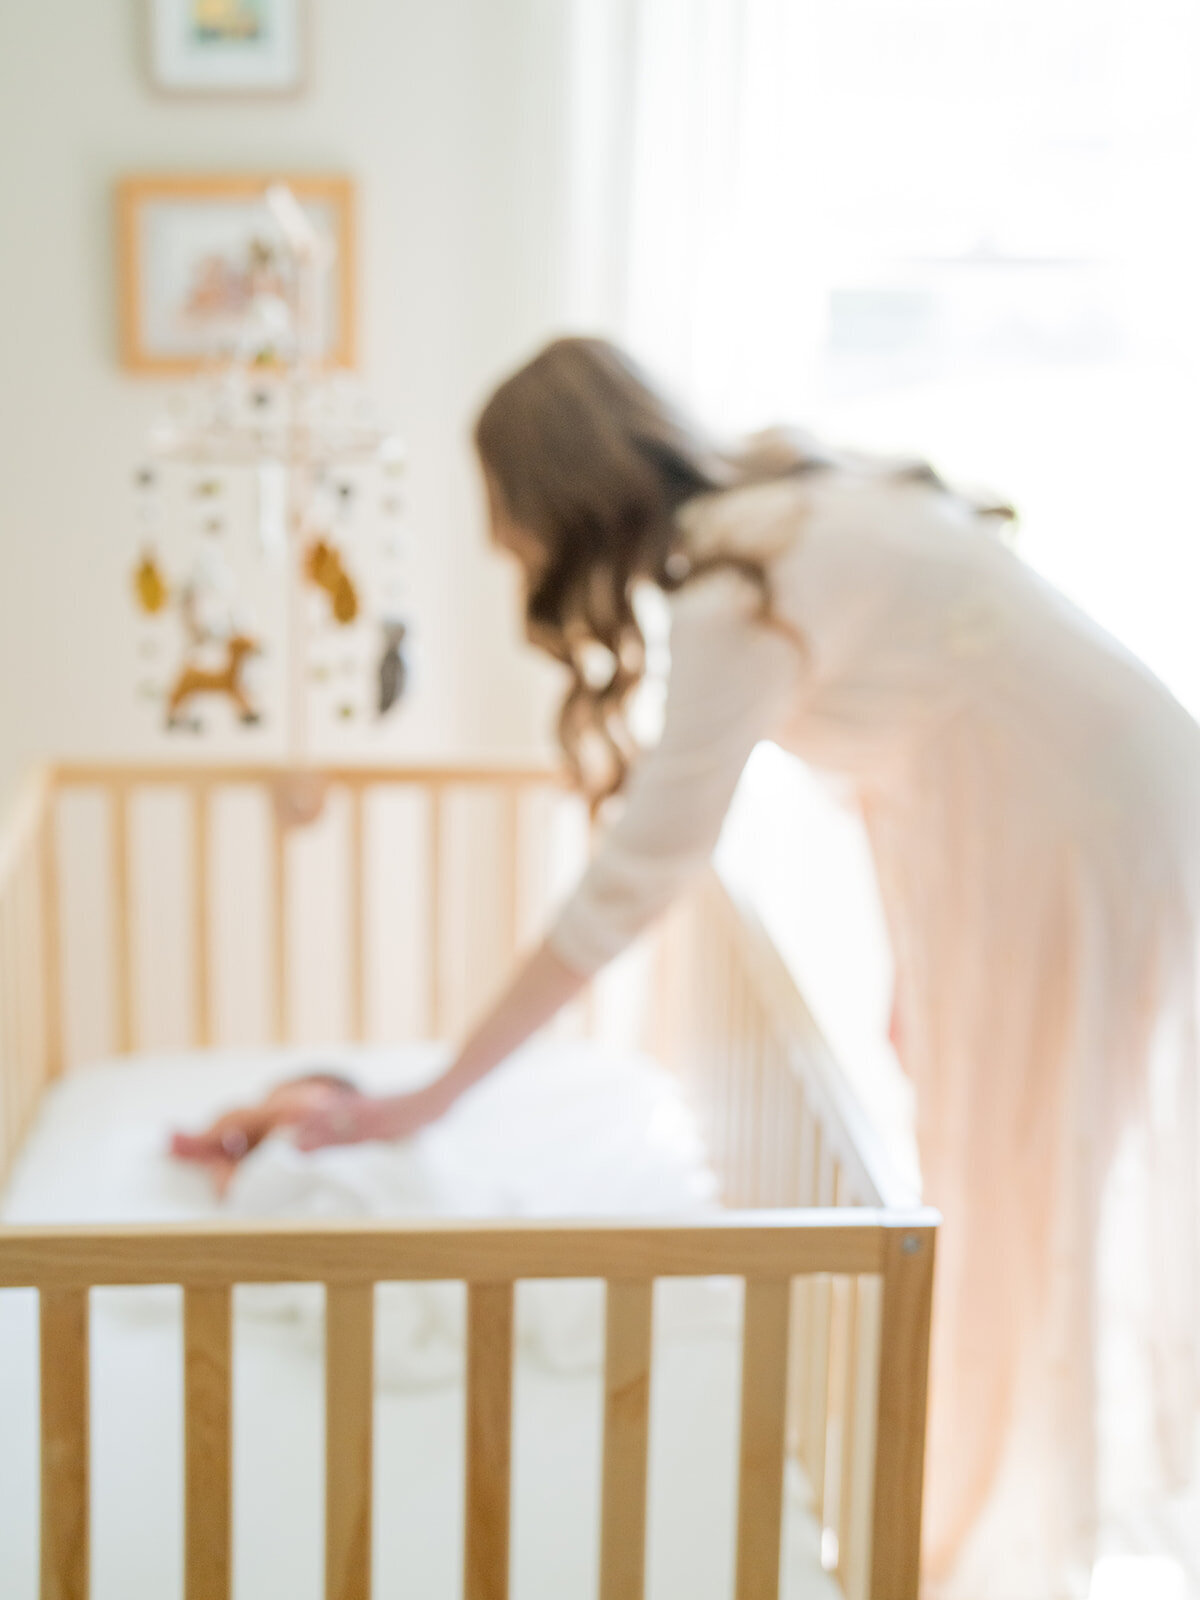 Out-of-focus mother leans down to place a hand on her baby boy in his crib during their Arnold Maryland newborn session.